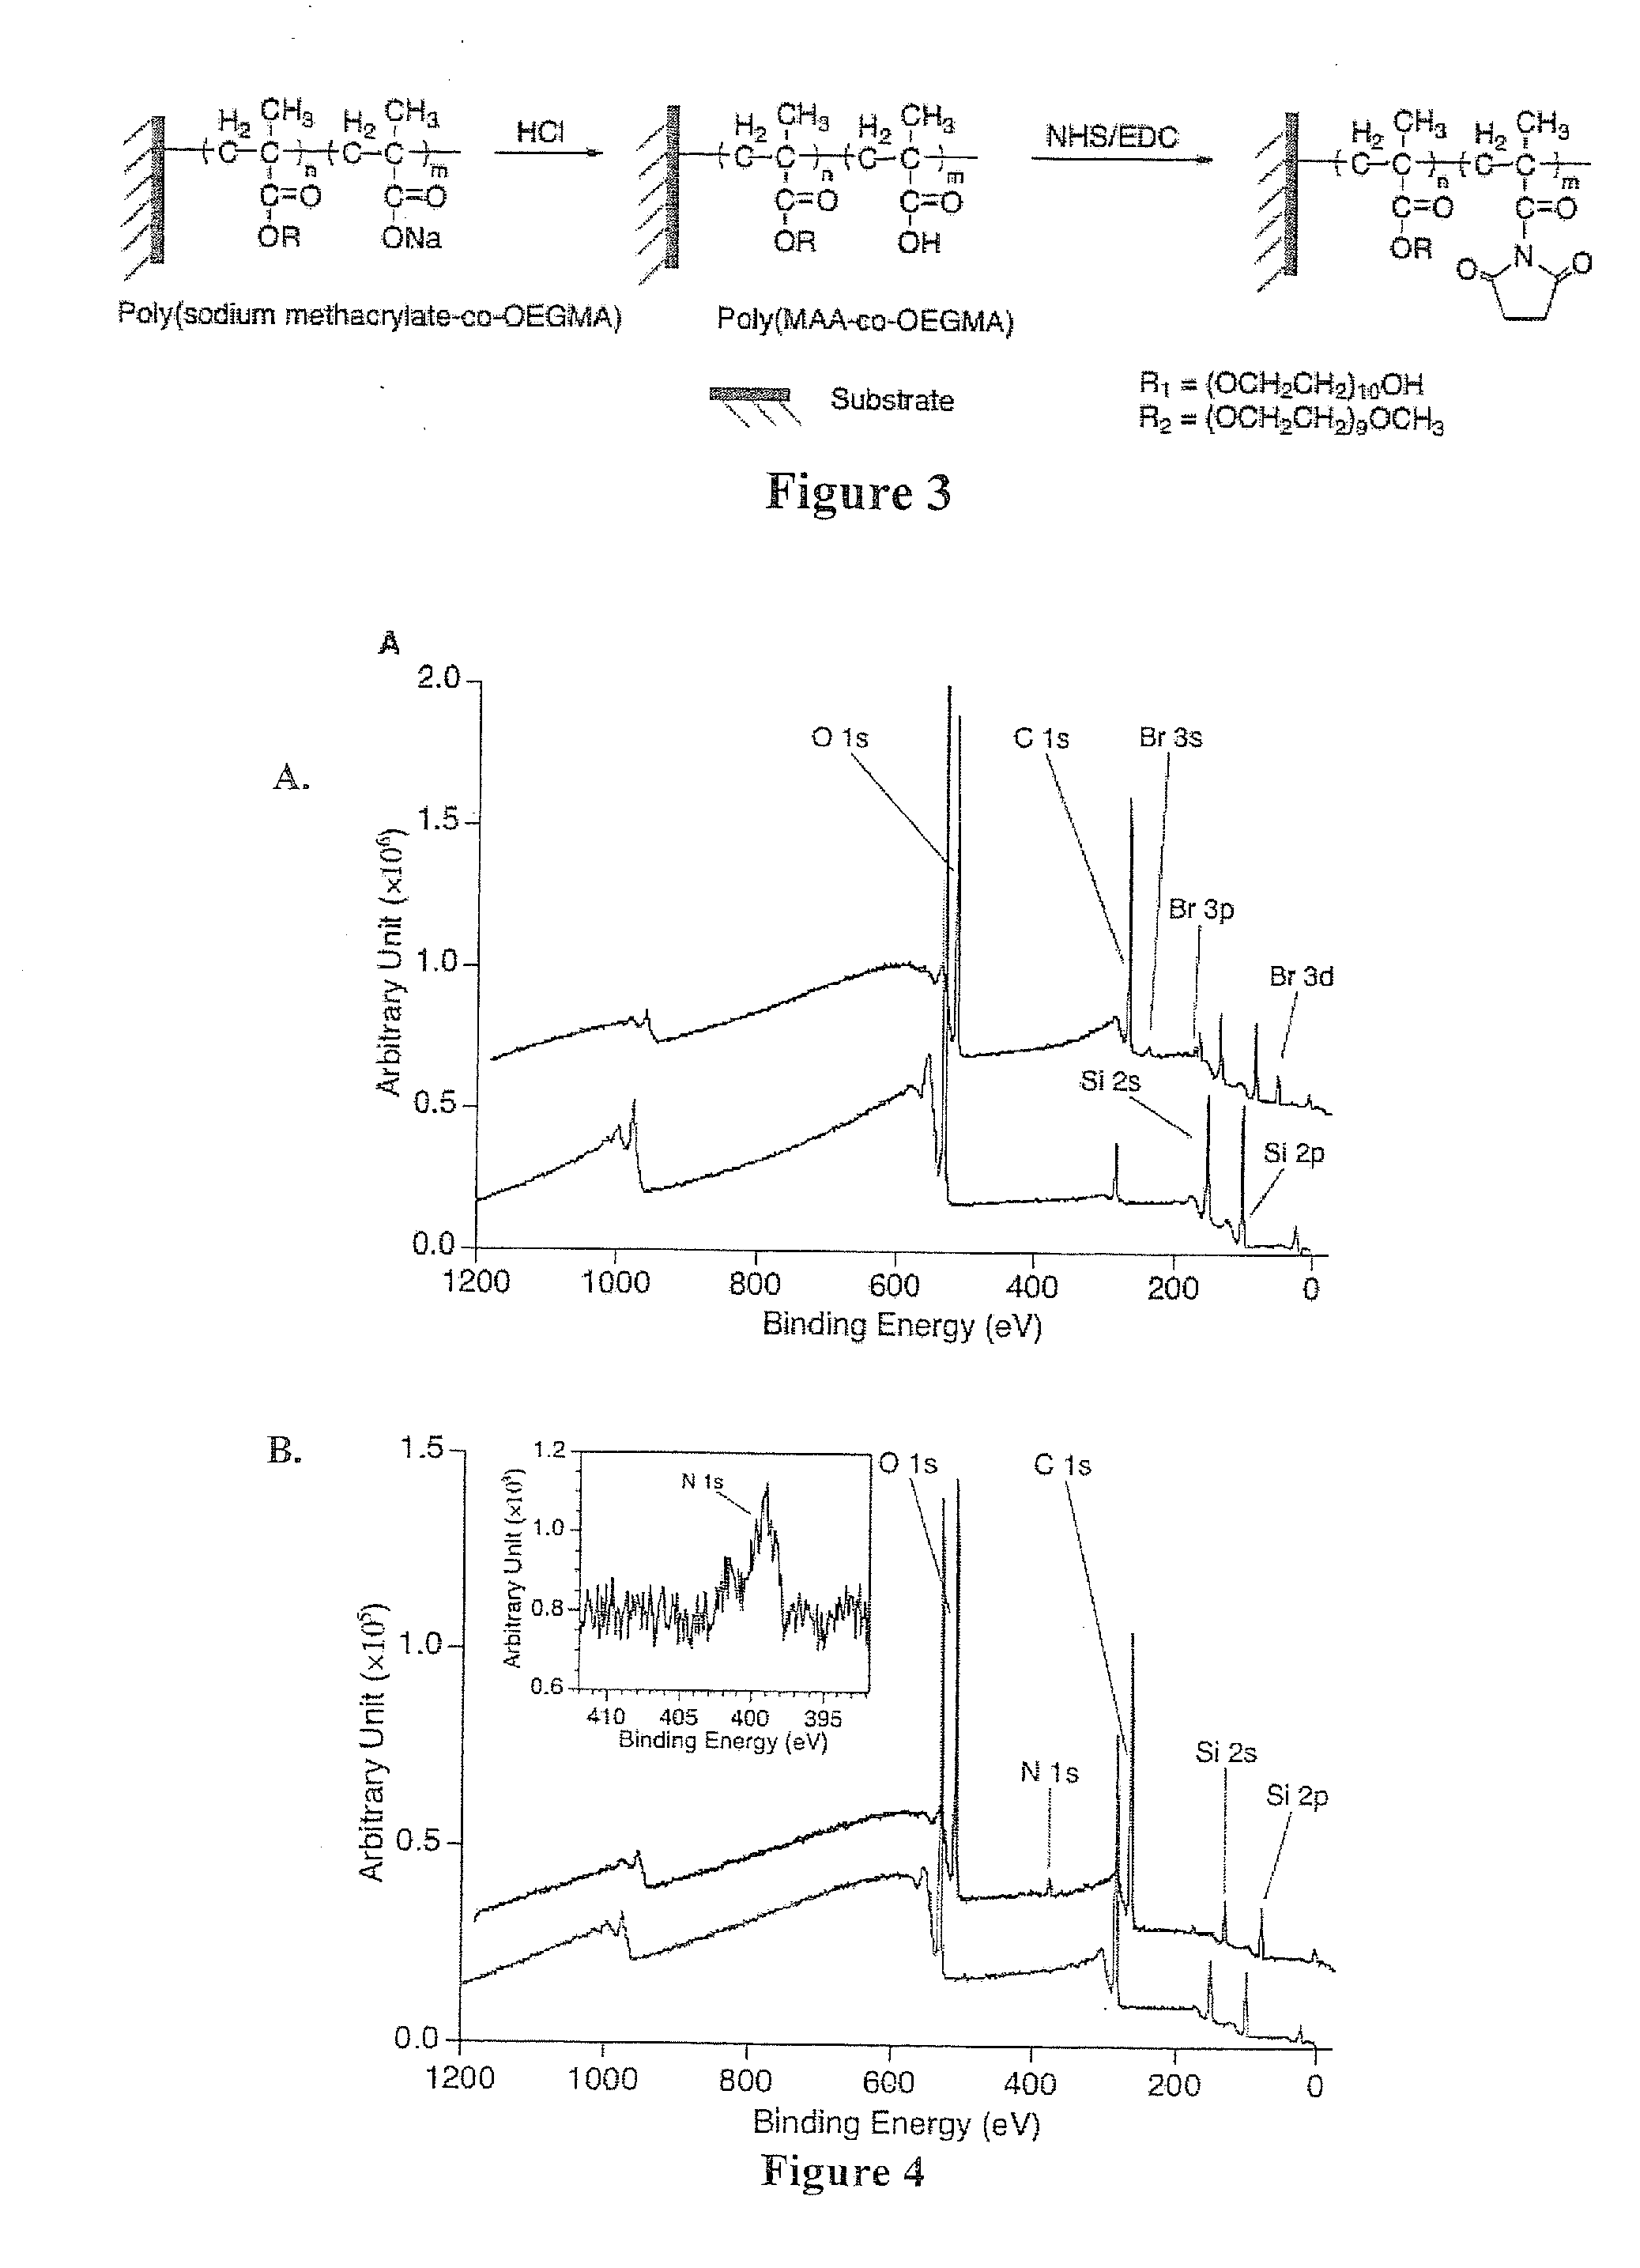 Non-fouling polymeric surface modification and signal amplification method for biomolecular detection